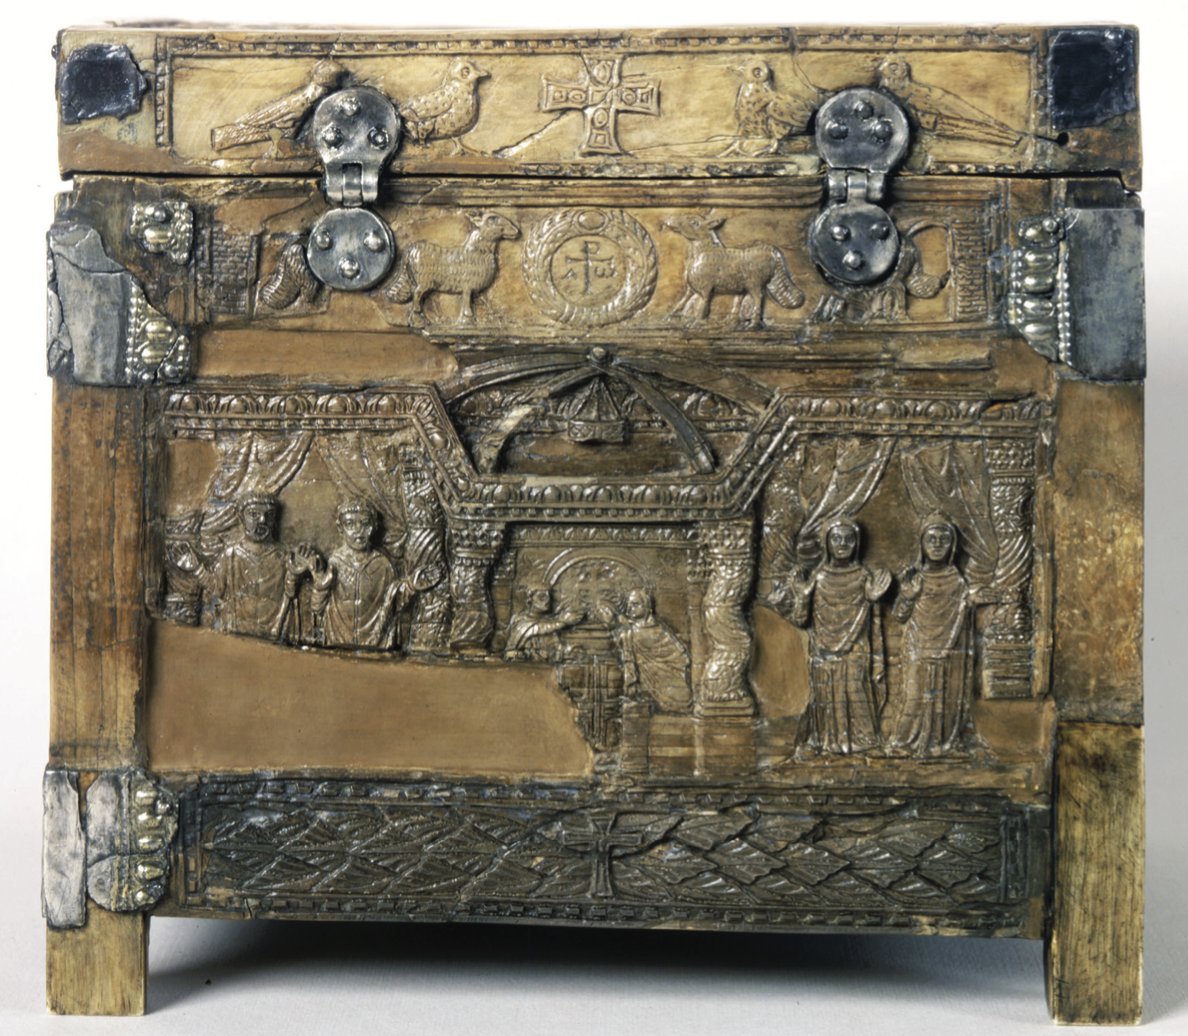 We see depictions of St Peter's tomb in Late Antique art. Here's an early 5th c ivory casket from Samagher, near Pola (Croatia). See the twisted columns around the tomb of Peter, as originally arranged. What other examples can you think of?